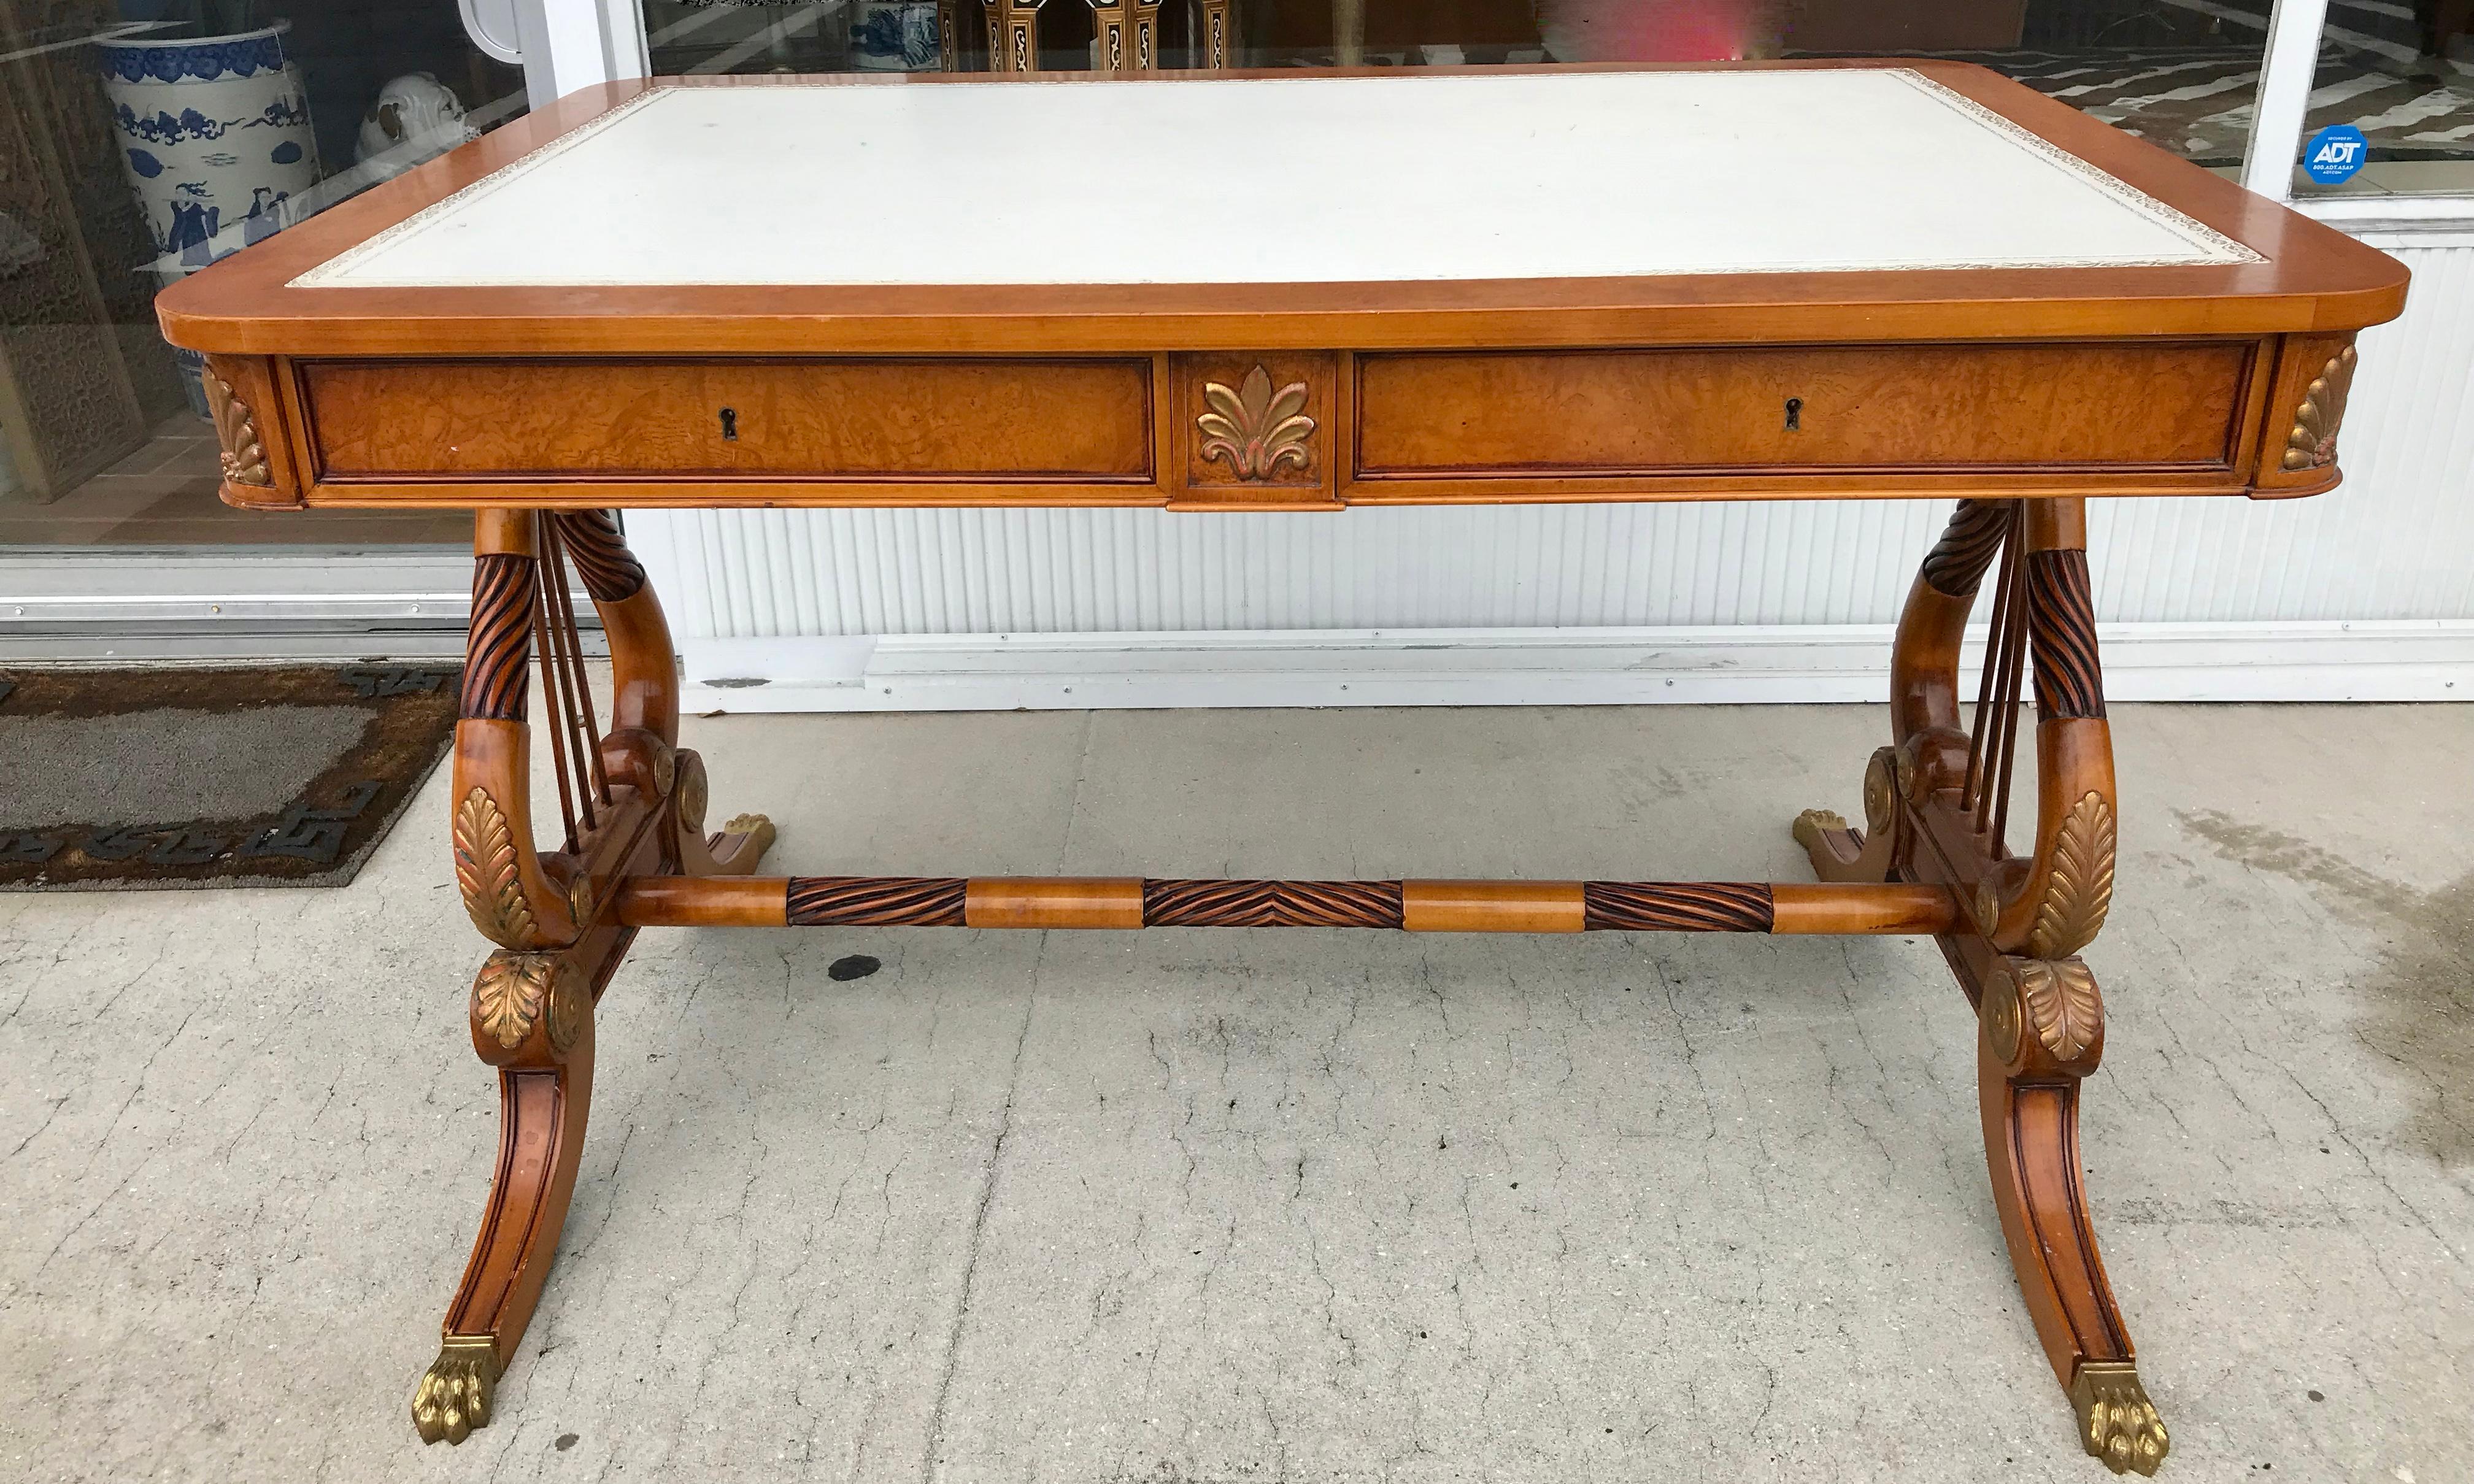 The desk is fitted with a gold embossed white leather top.
The ends are lyre form. The fruitwood is embellished with gilt accents.
The piece is fitted with 2 drawers and terminating with brass lion paw feet.